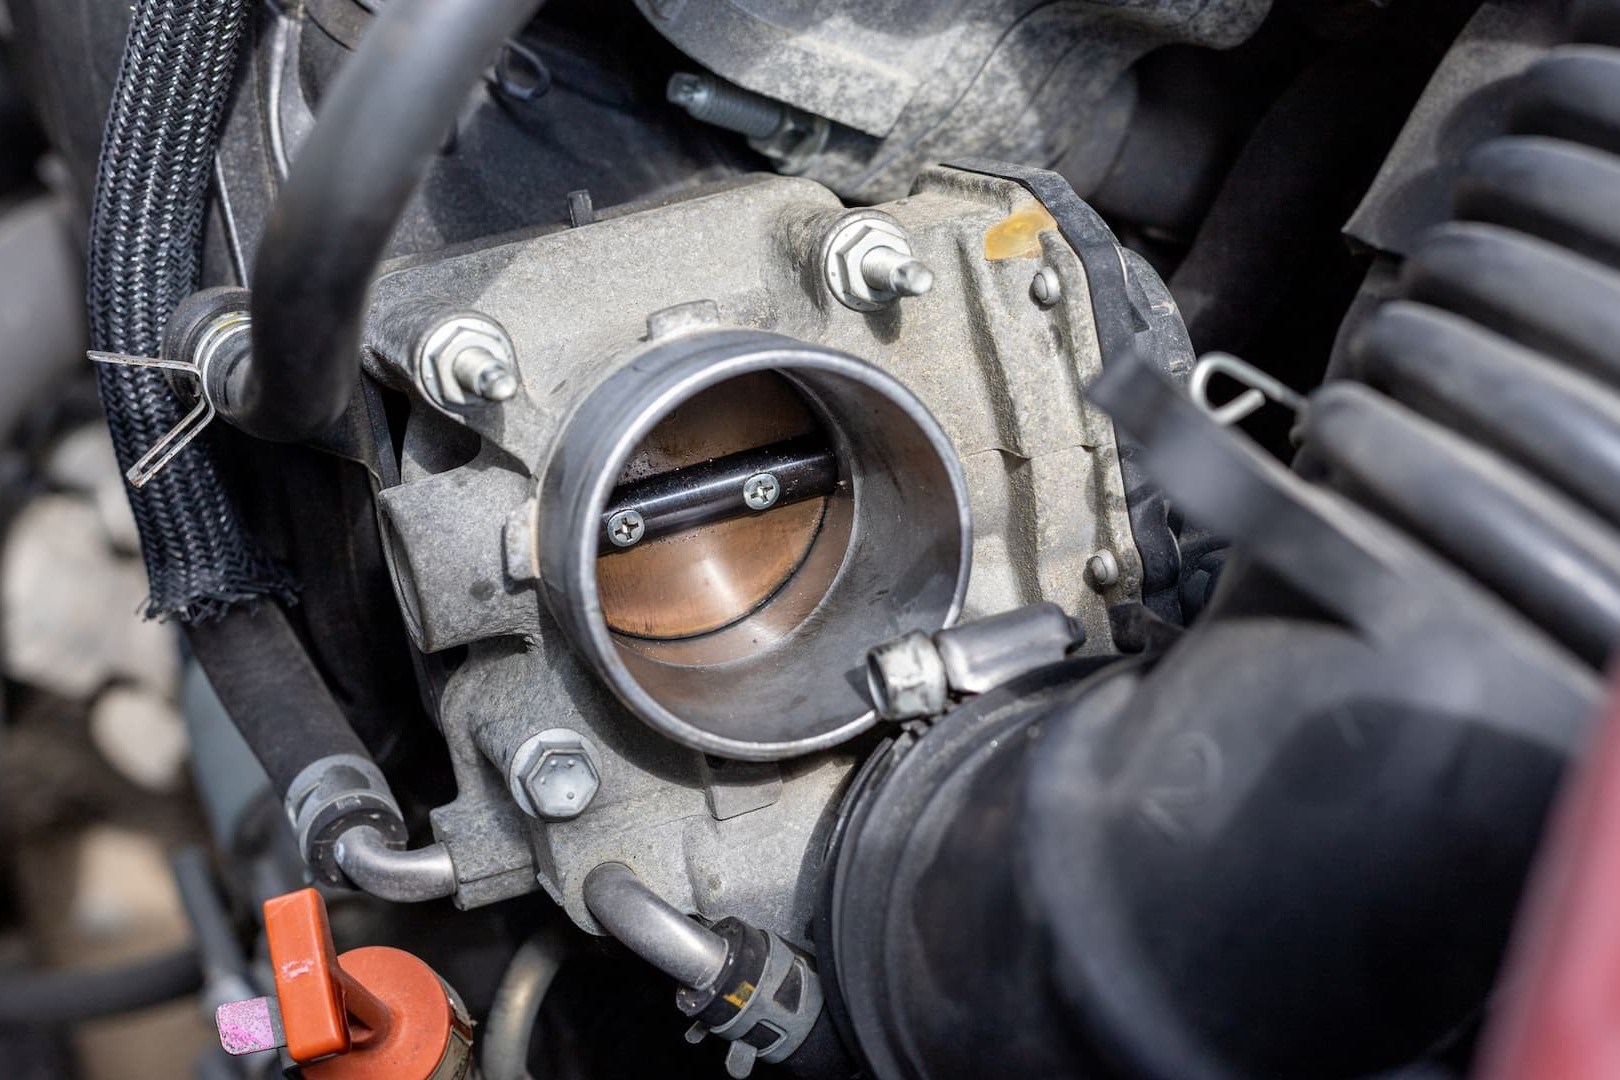 Signs Of A Faulty Throttle Body Or Sensor - Don't Miss These Red Flags!